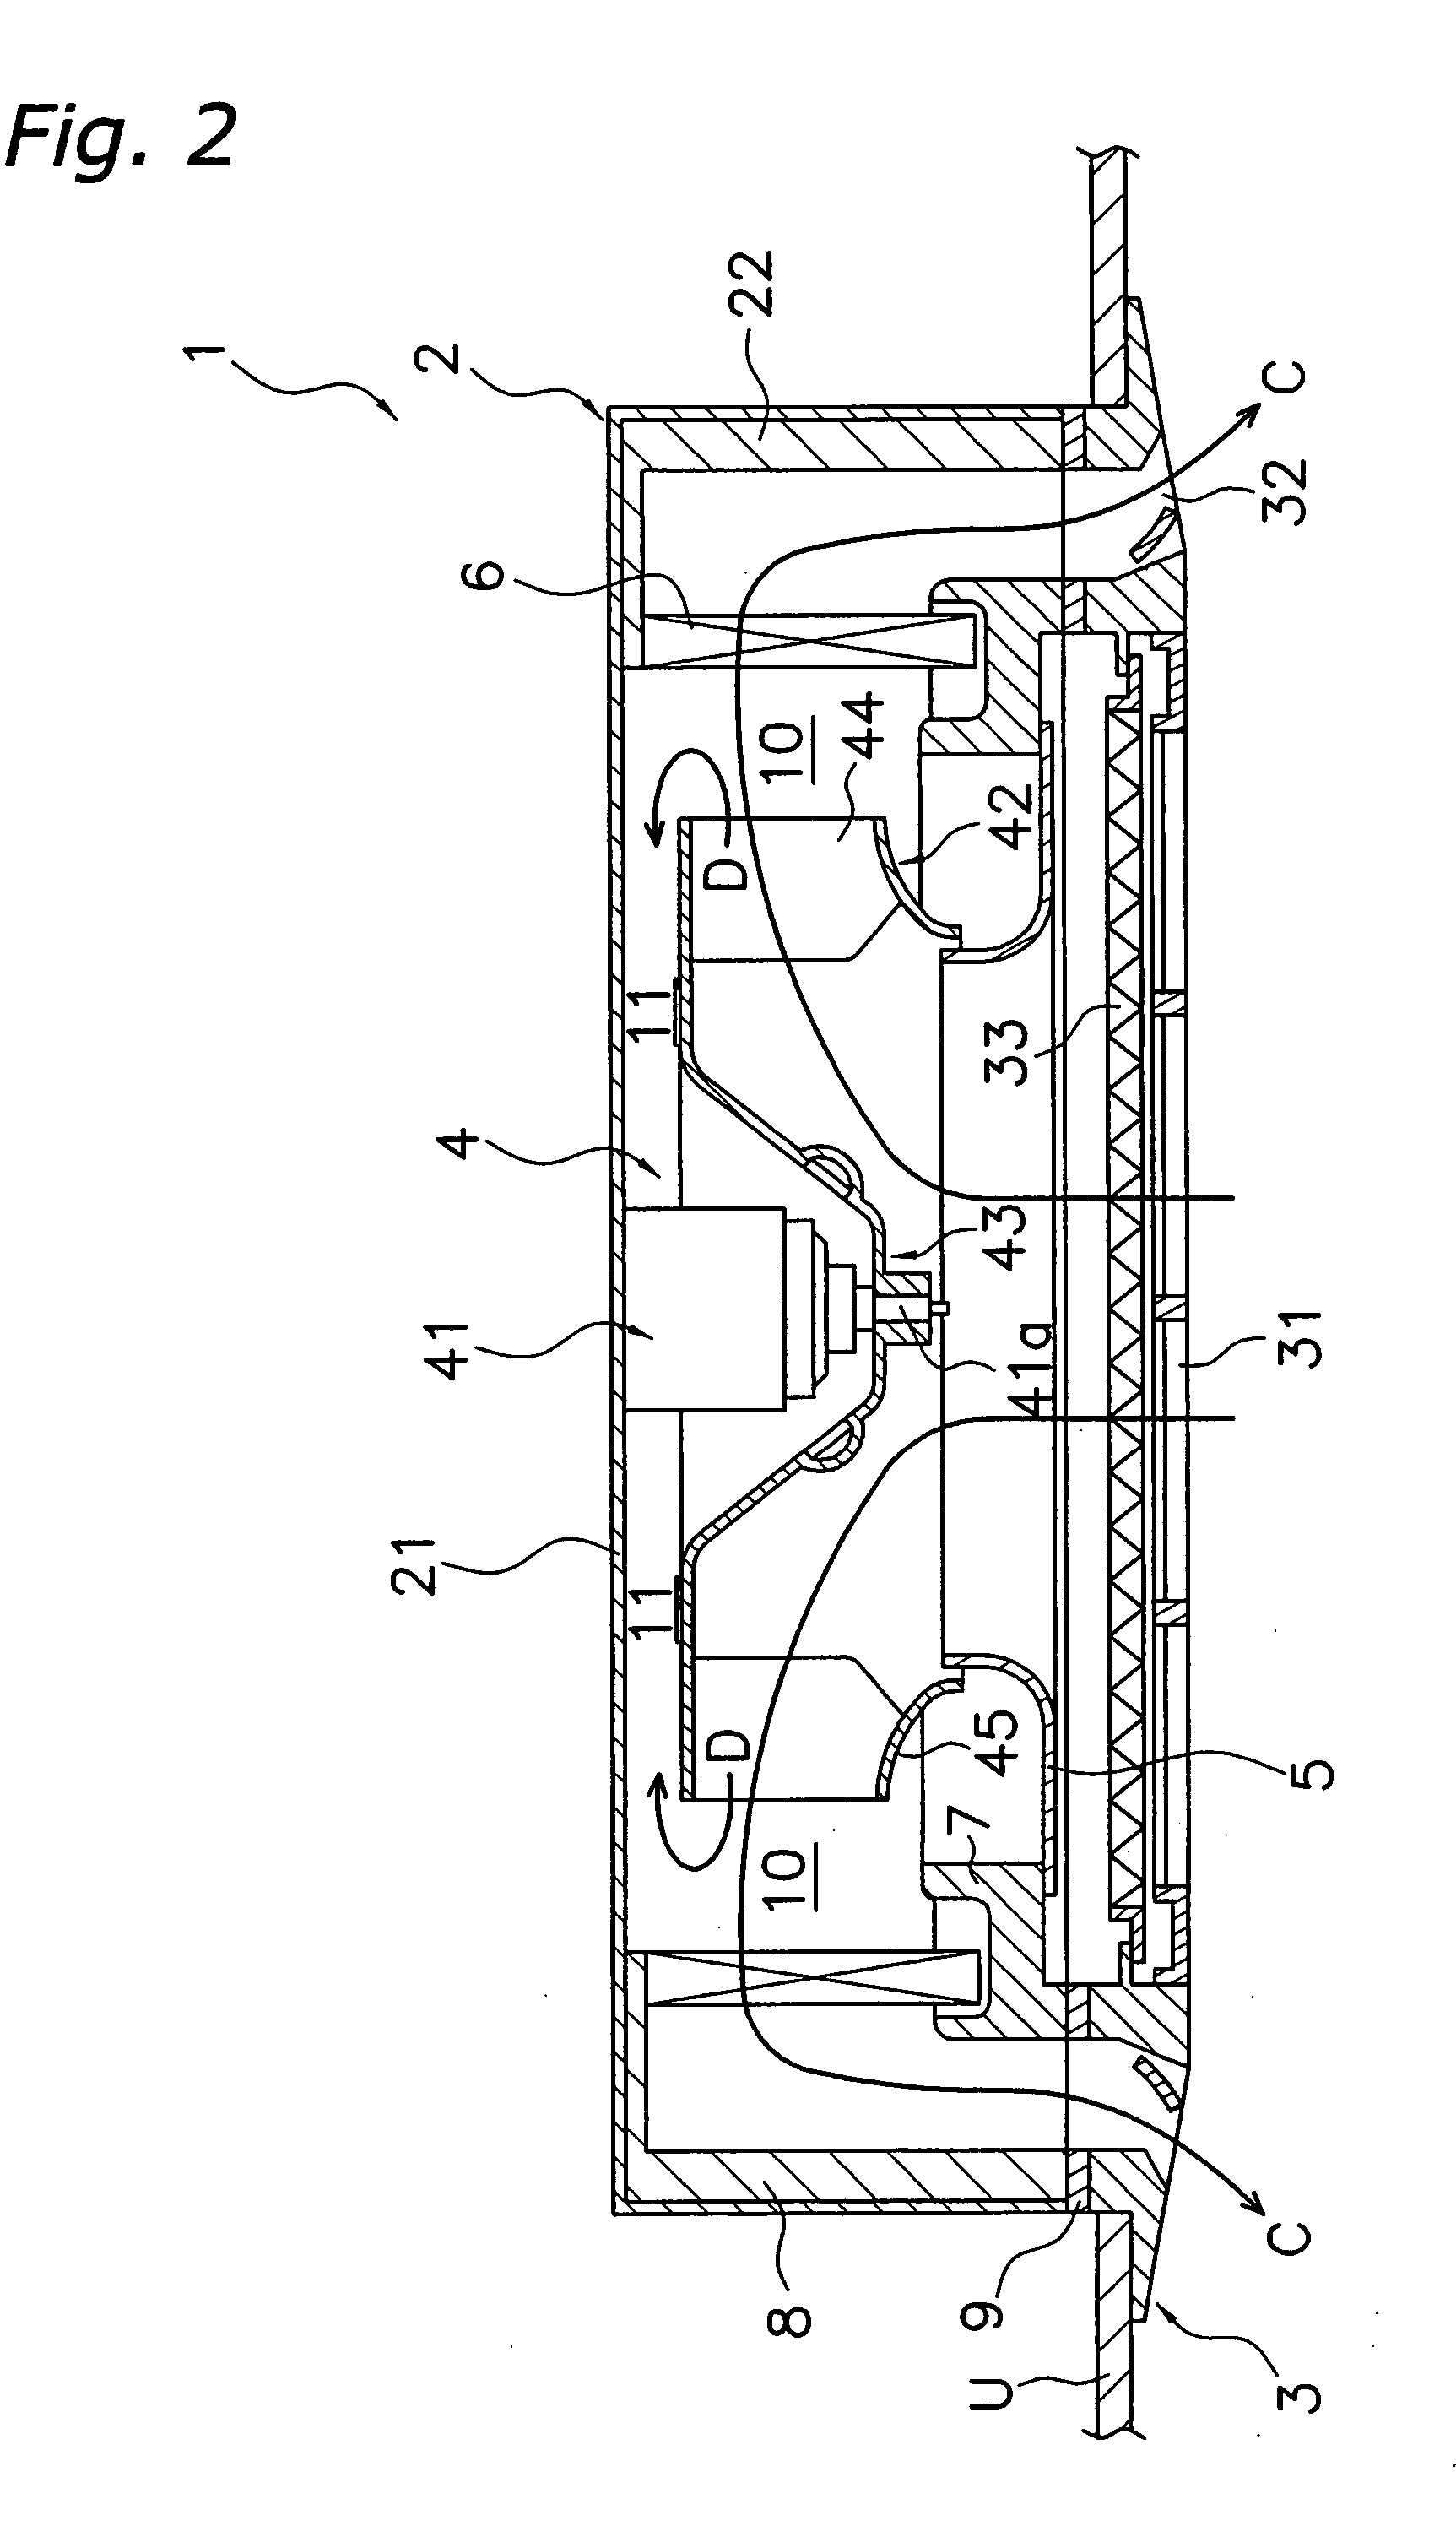 Centrifugal blower and air conditioner with the same